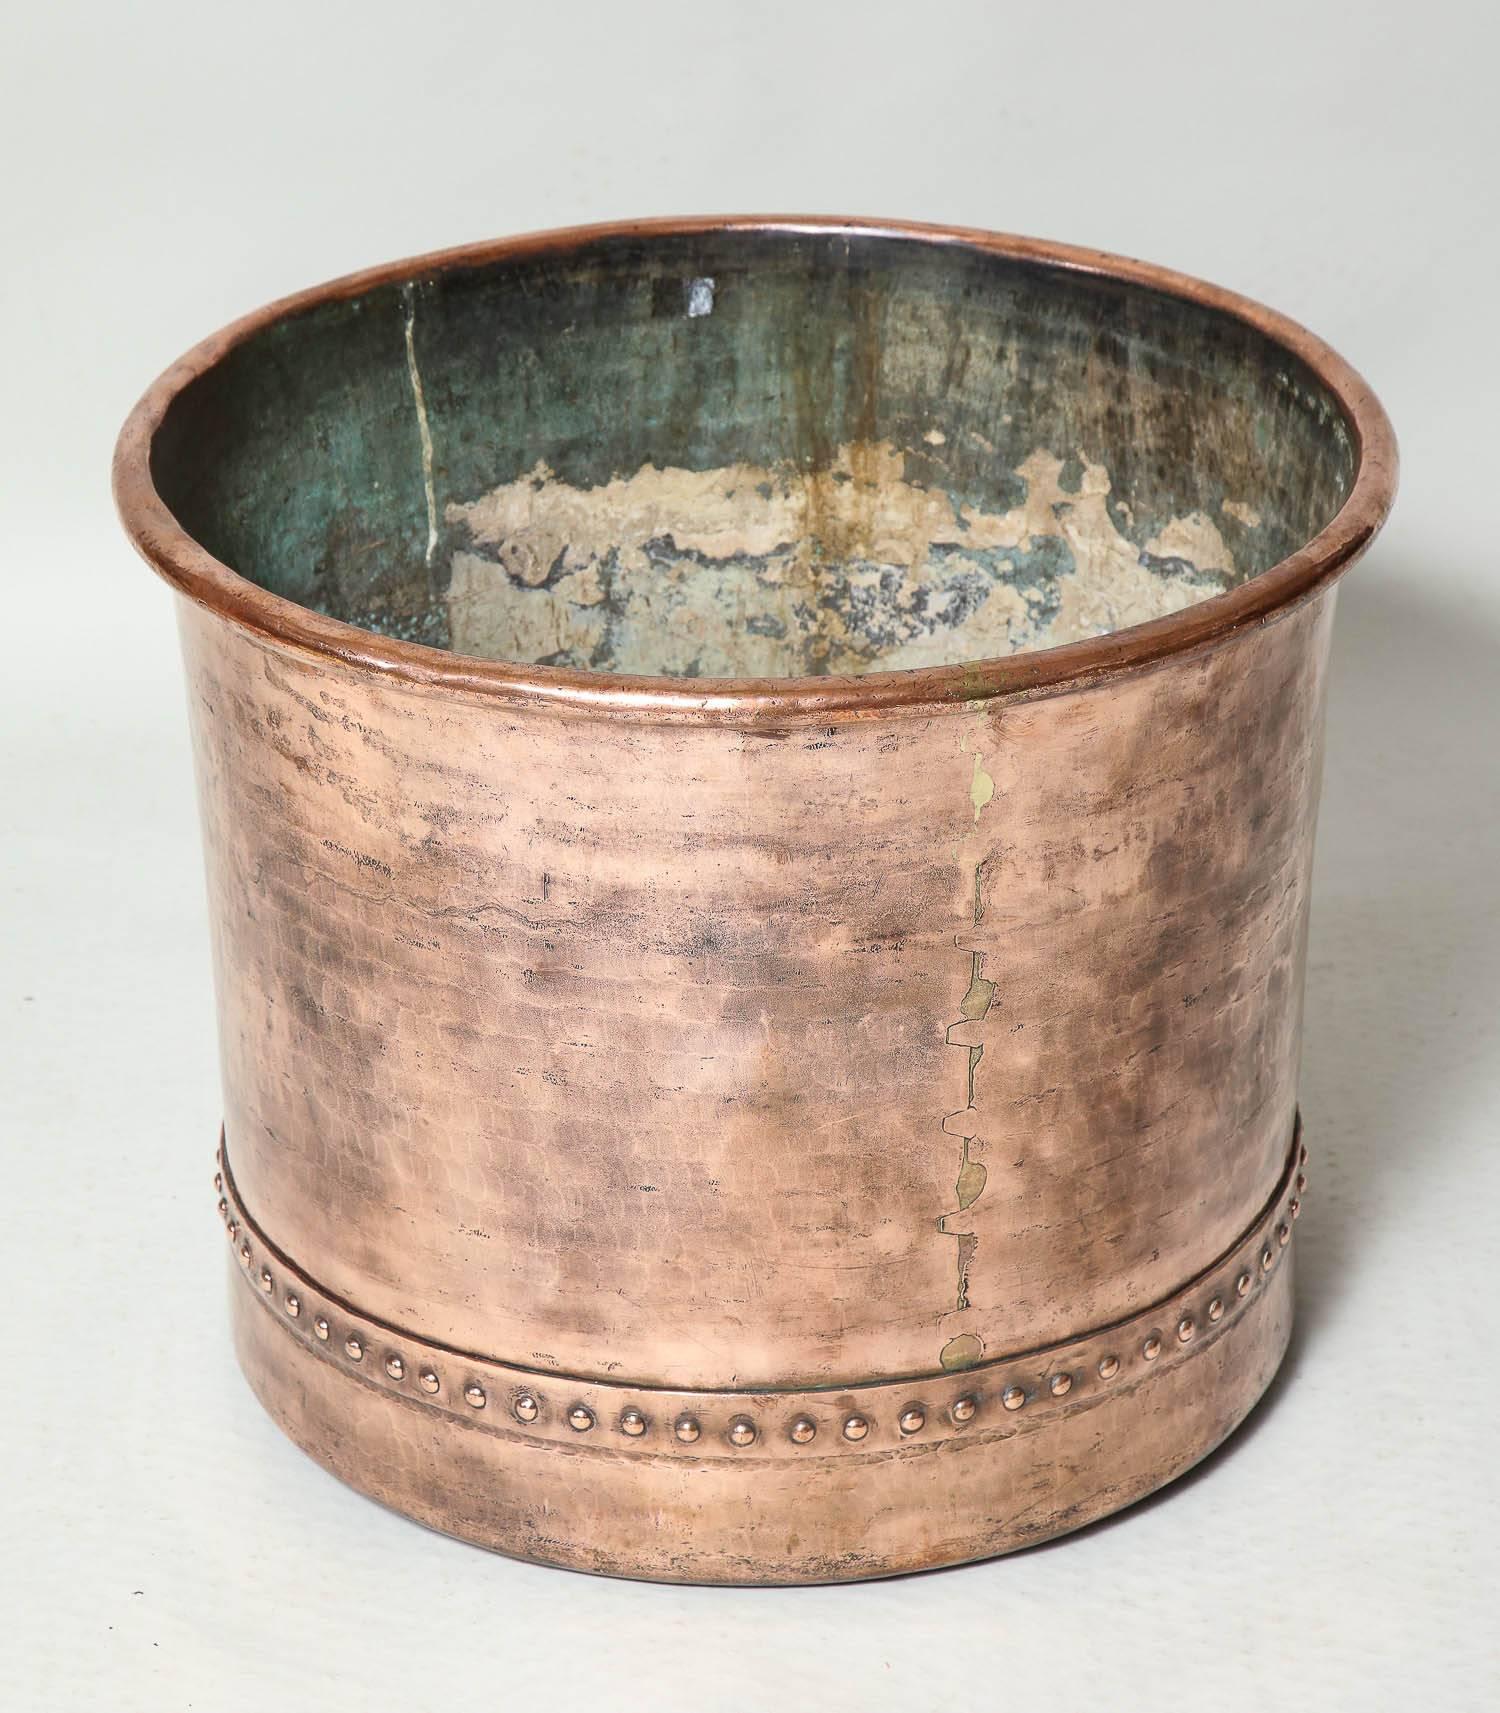 Very fine 19th century English copper log bin, having rolled edge over finely beaten and slightly tapering sides, dovetail joined seam and hand riveted banding. Ideal for firewood or as planter.